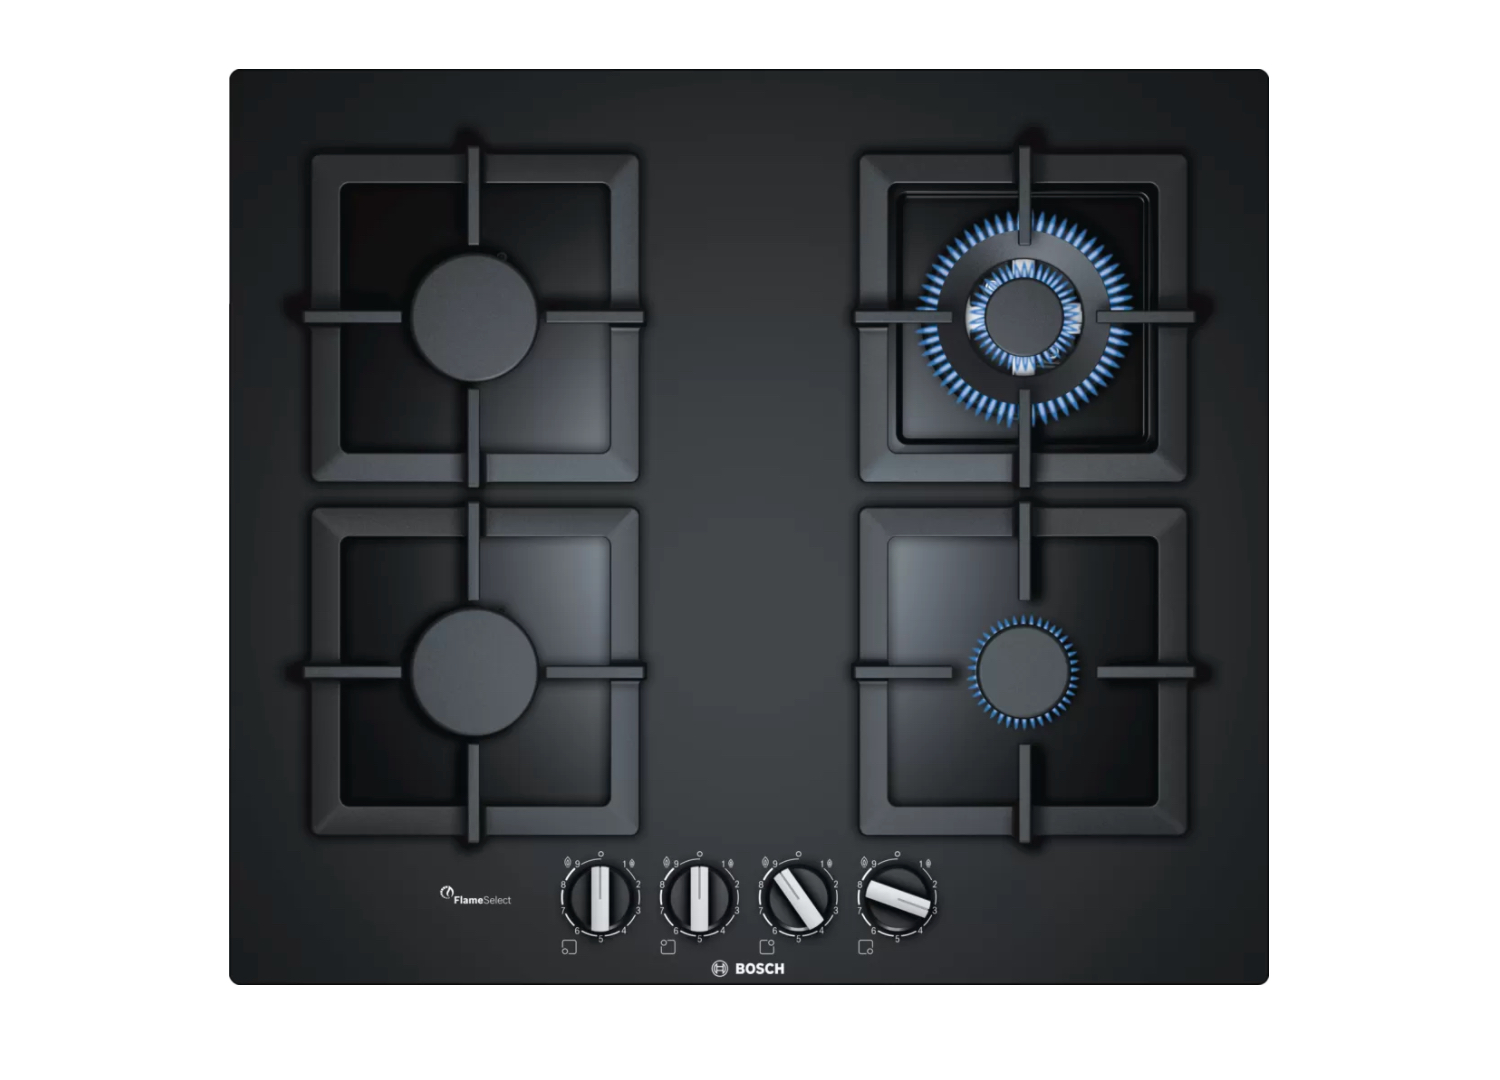 5-Burner Gas Hob with FlameSelect and Wok Burner - Easy-to-Use Controls and Next Day Delivery